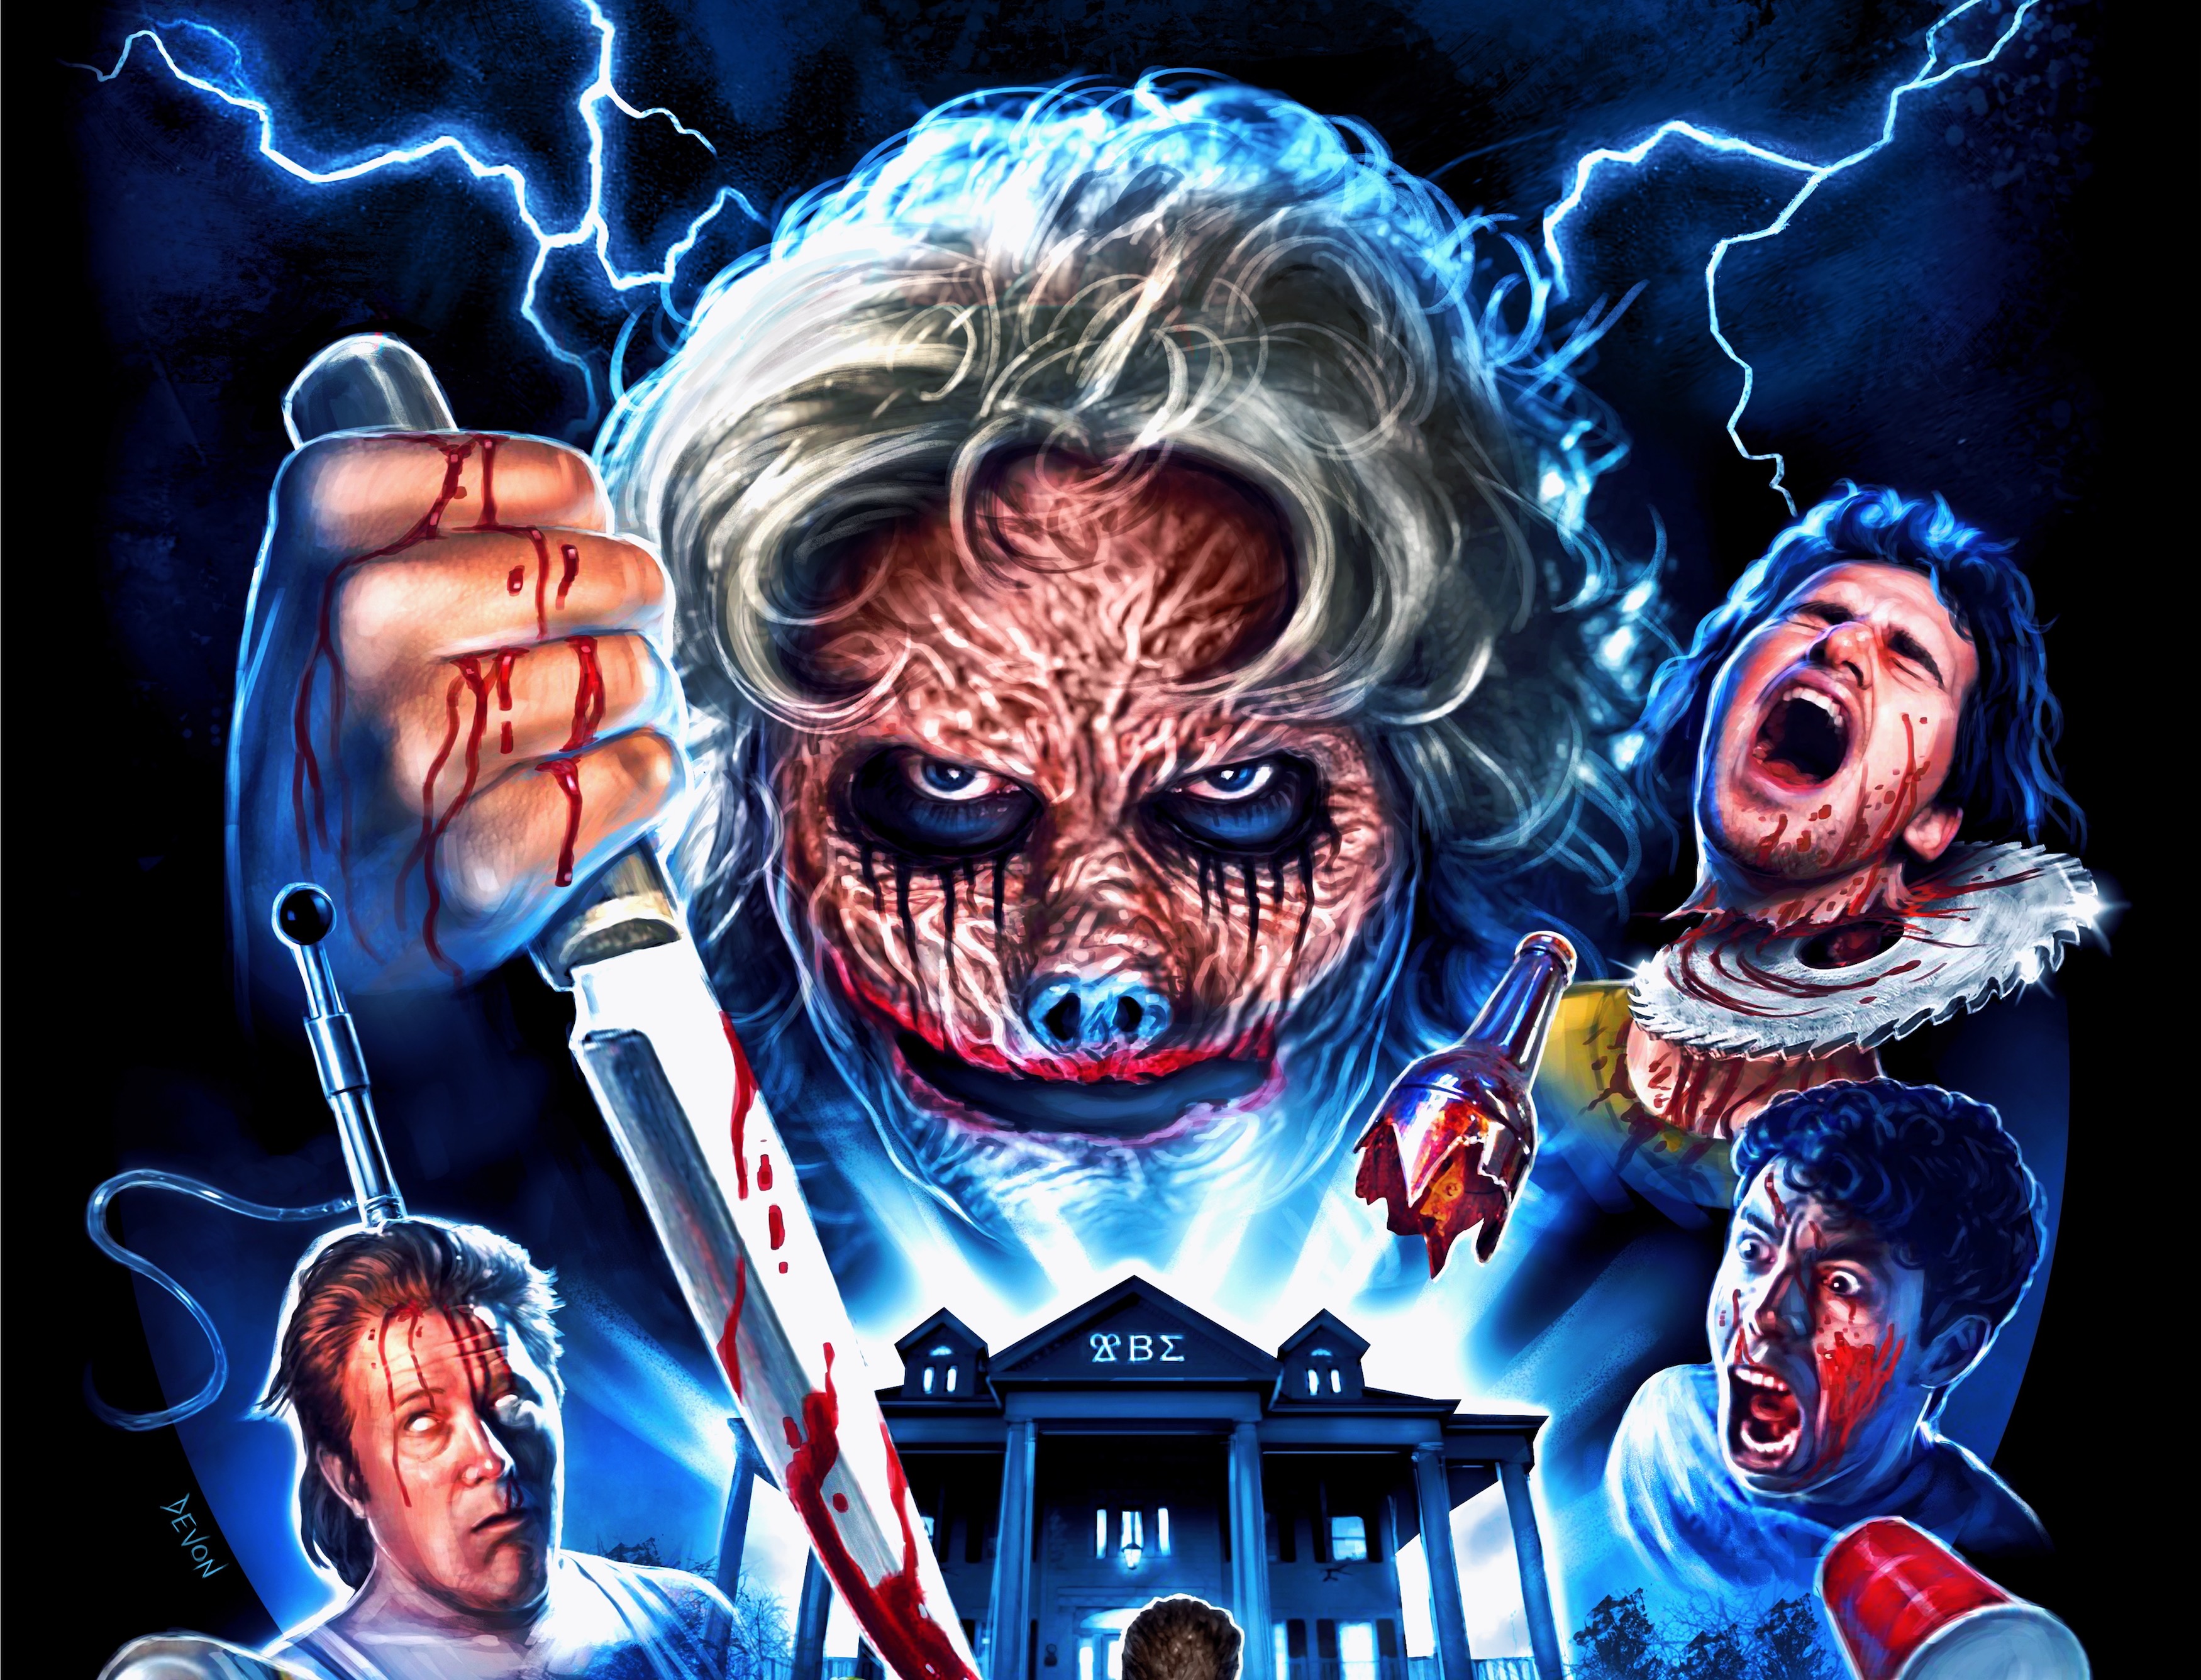 Detail from an art poster for Dude Bro Party Massacre III, with a knife-wielding, gray-haired woman covered in blood and various decapitated and mutilated bros